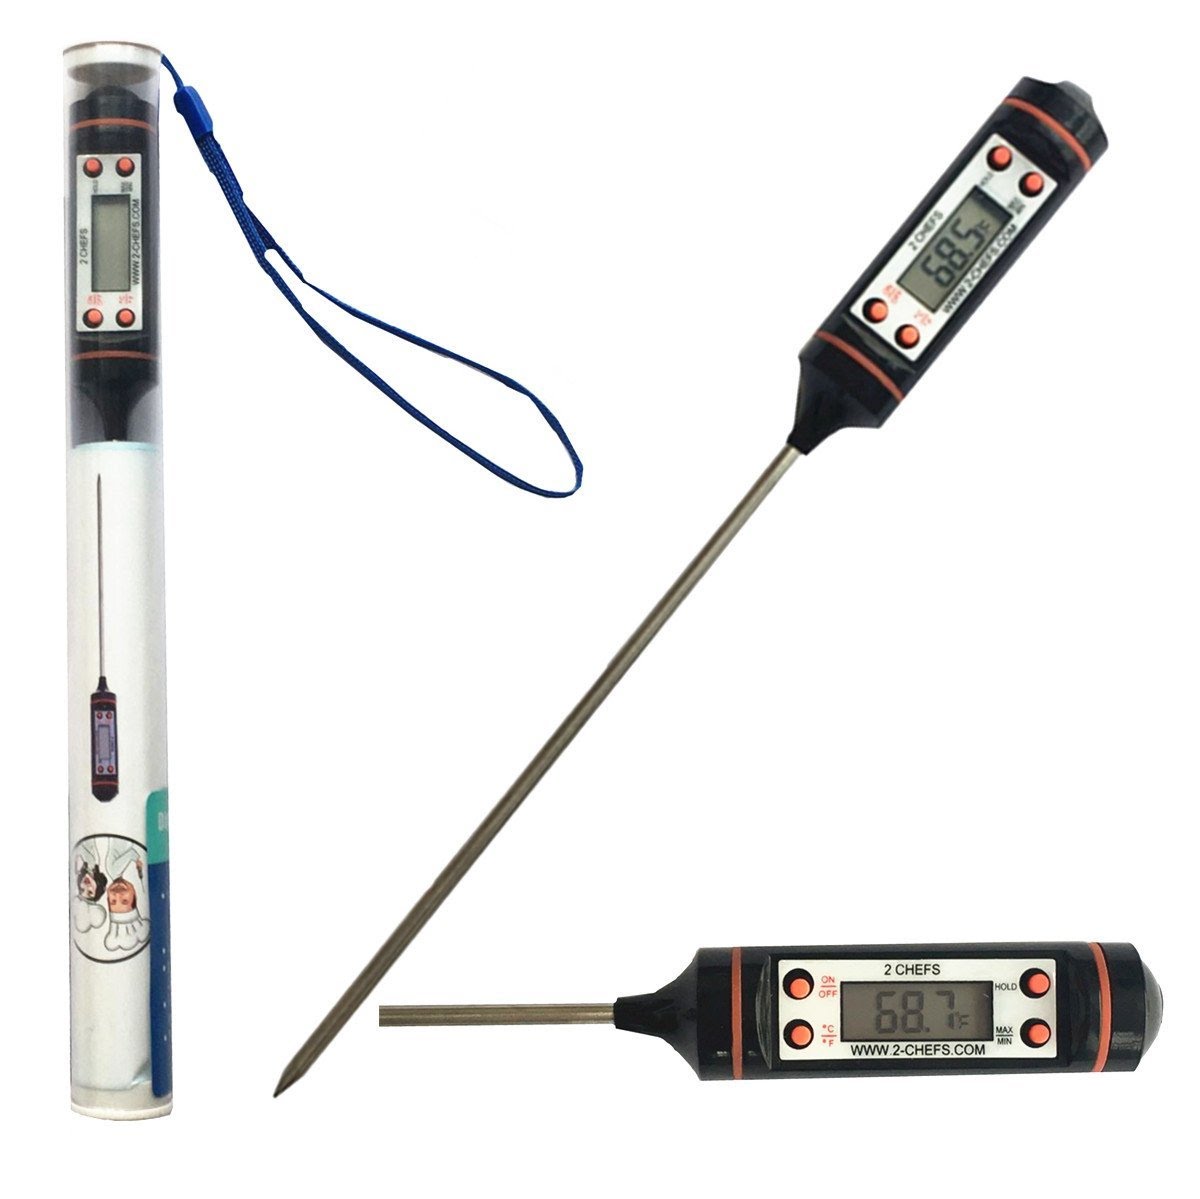 2 Chefs Digital Meat, BBQ and Candy Thermometer, Great for the Kitchen Indoors and Cooking Outdoors